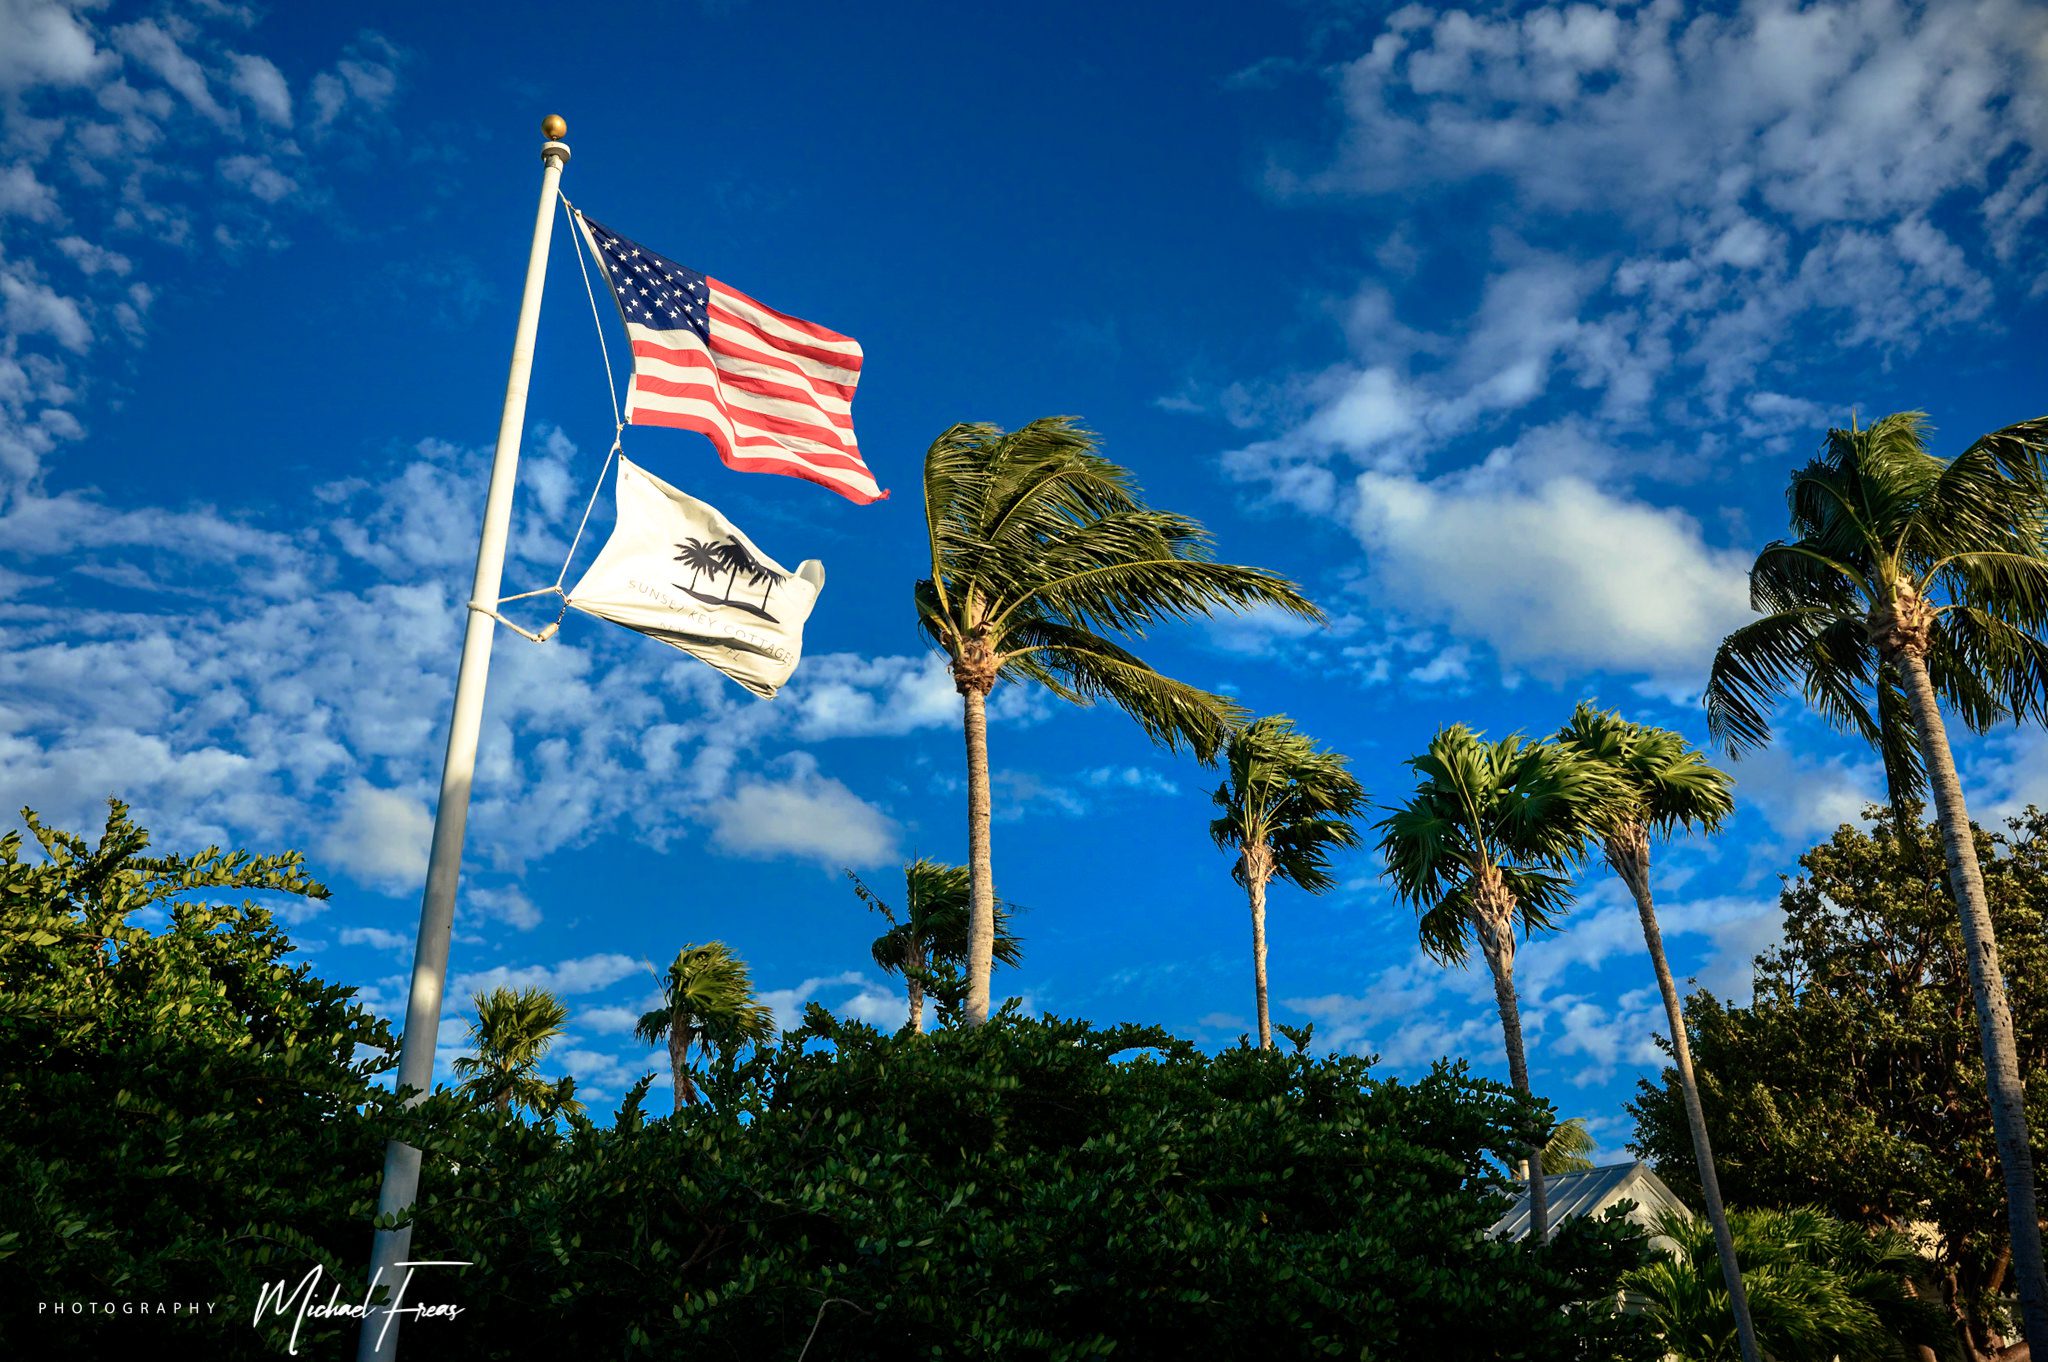 A flag flies in front of a palm tree at a Florida Keys destination wedding.